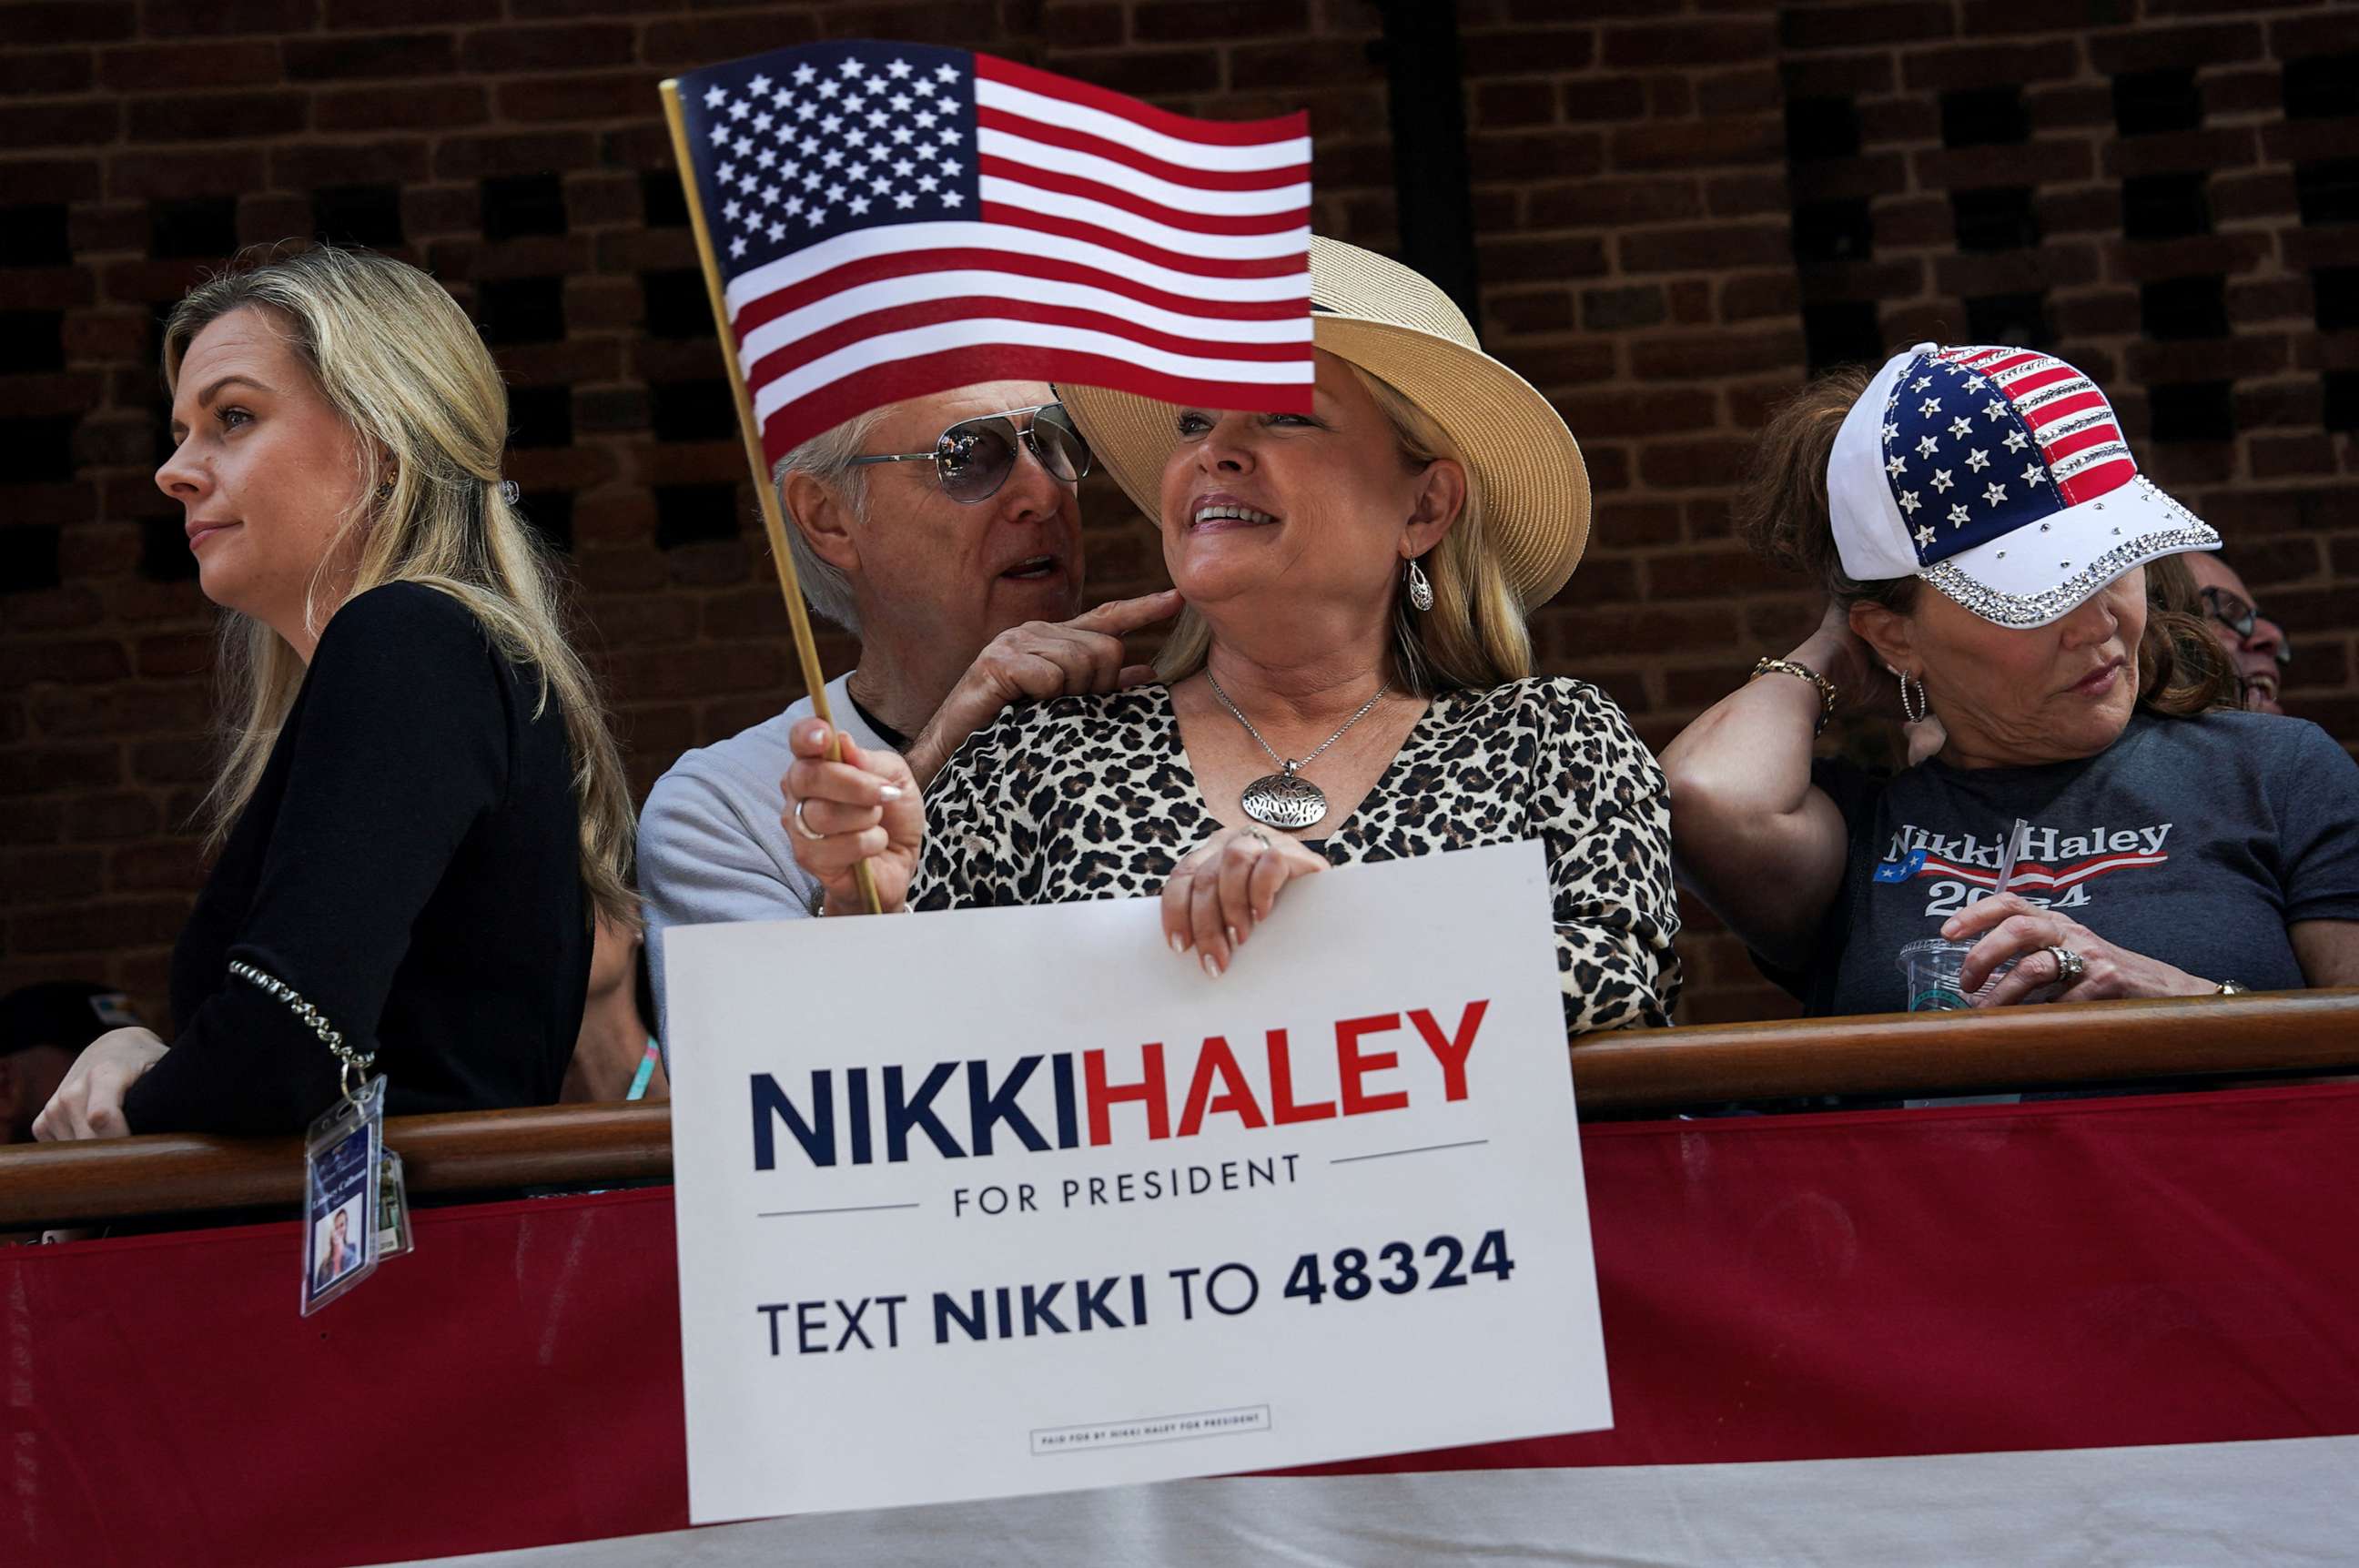 PHOTO: People wait in line for former South Carolina Governor Nikki Haley to announce her campaign for the 2024 Republican presidential nomination, at an event in Charleston, S.C., Feb. 15, 2023.